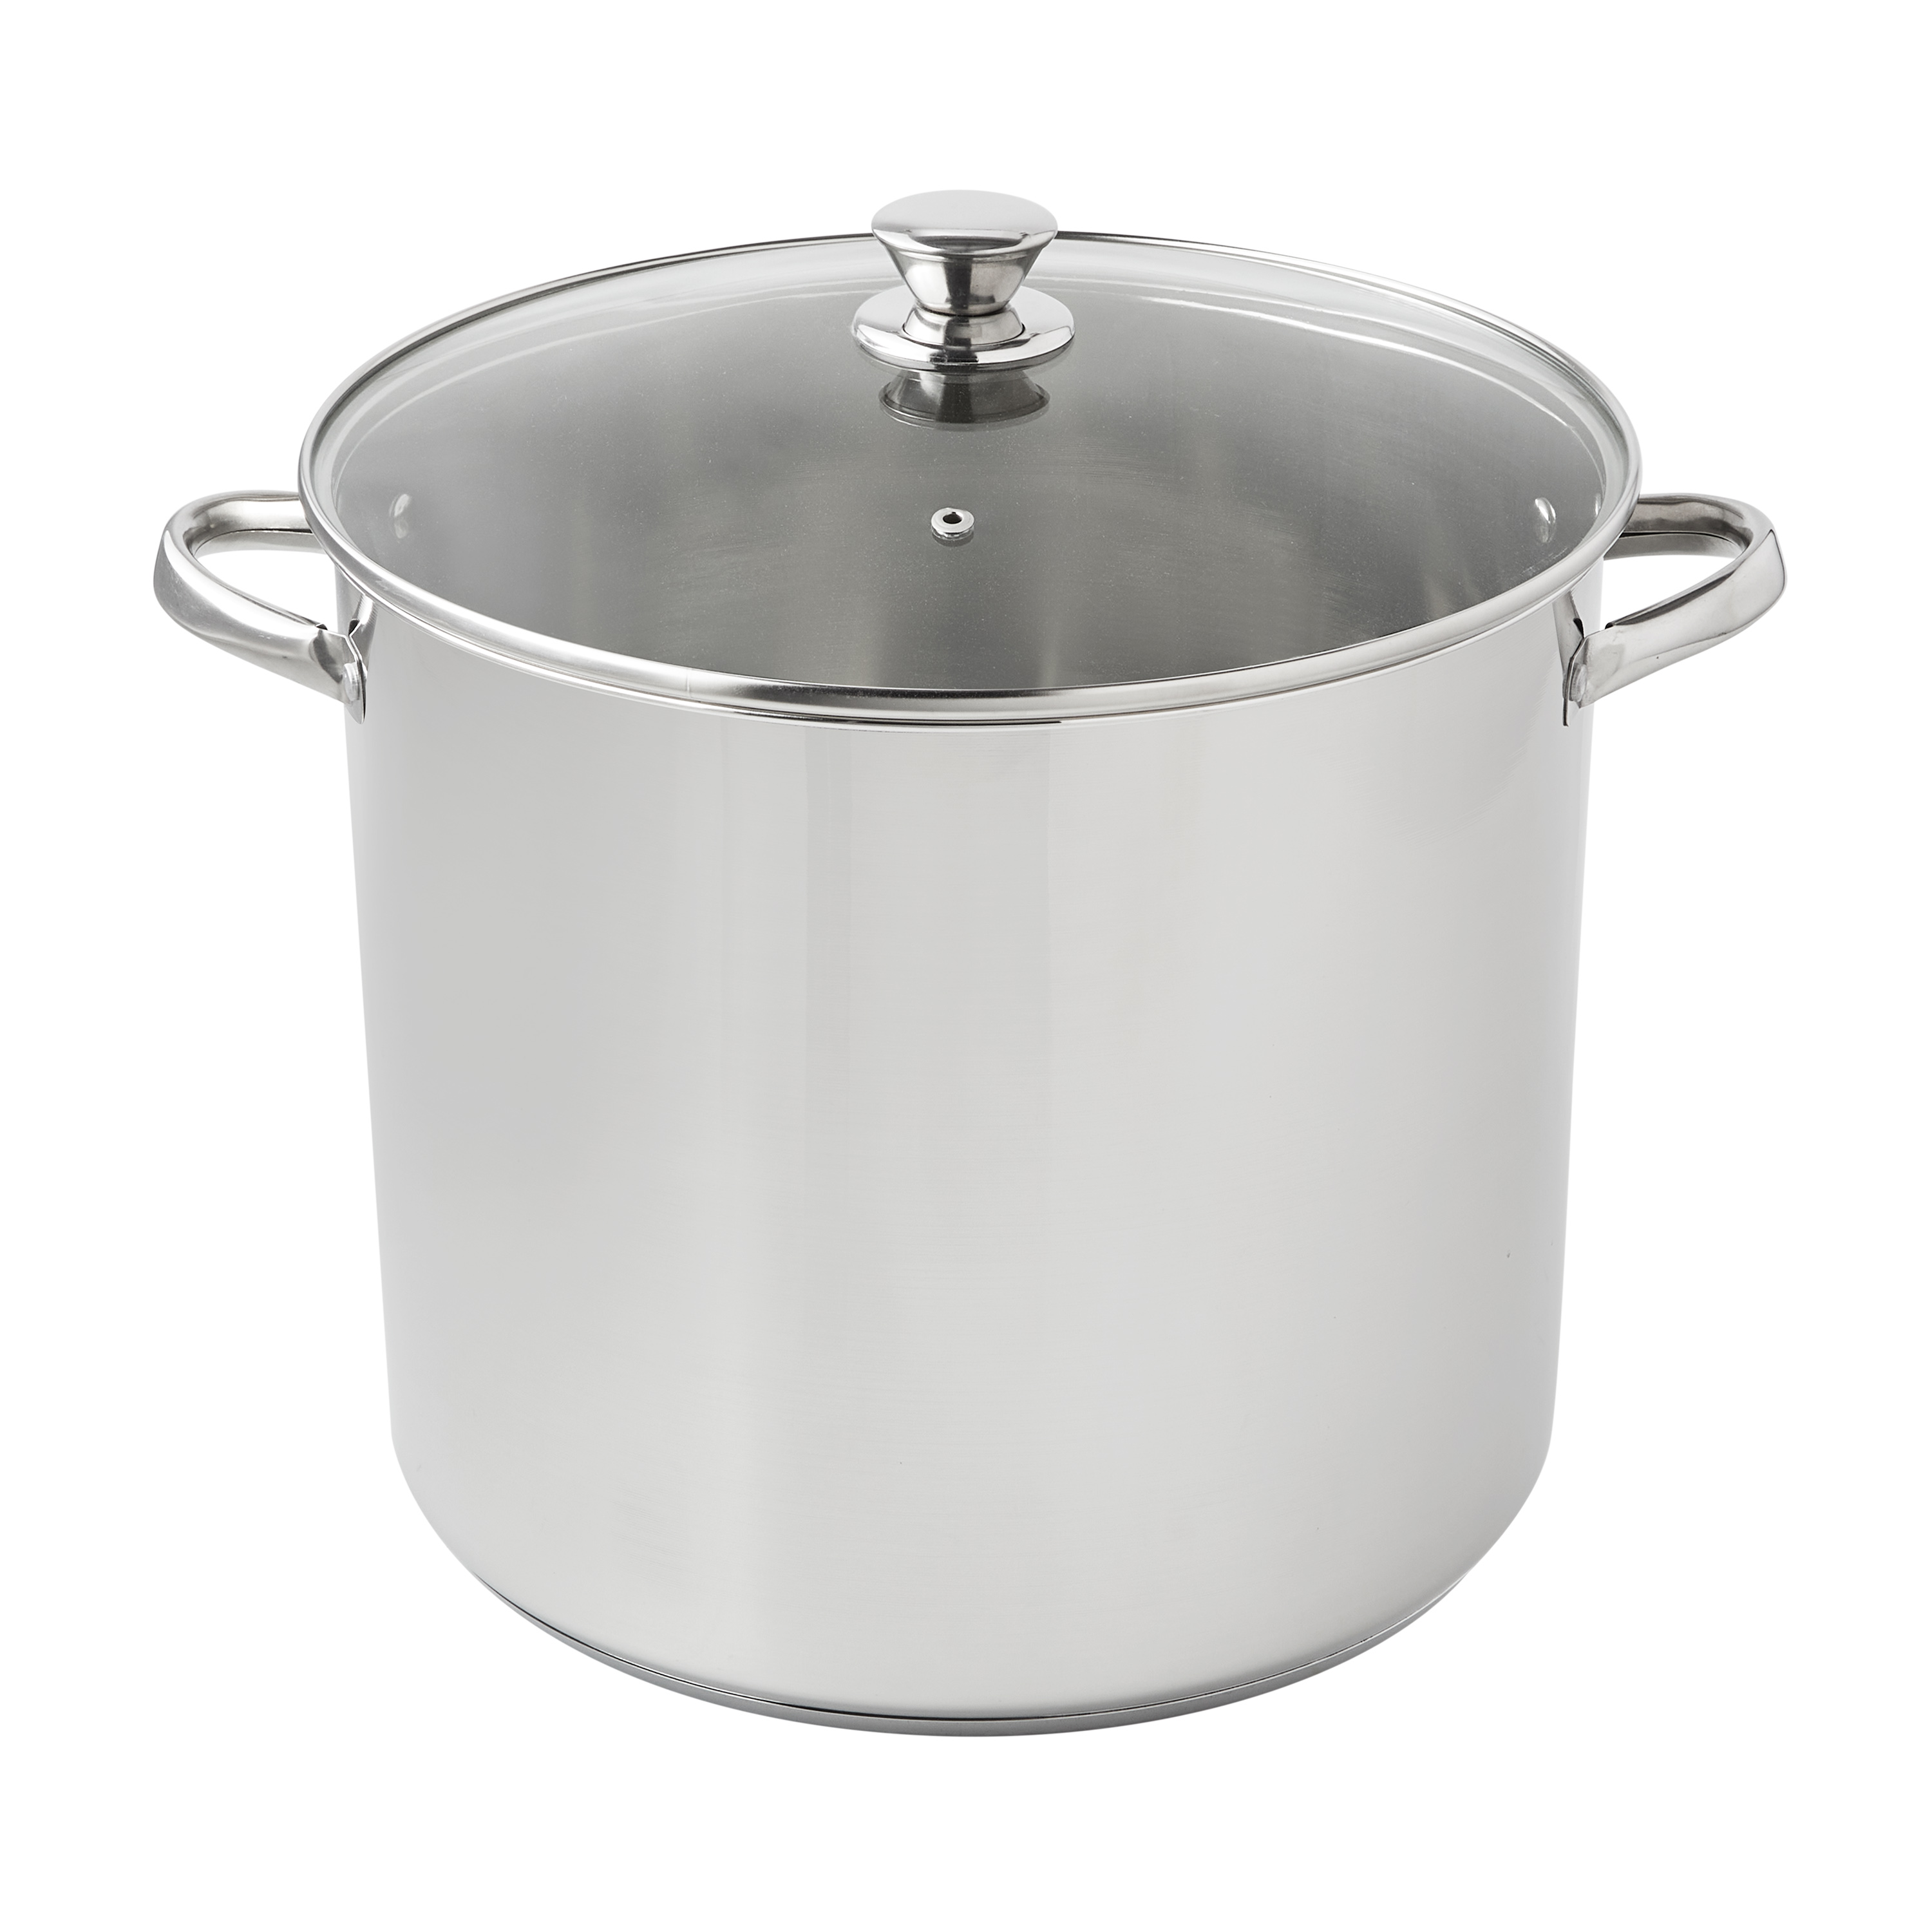 Mainstays Stainless Steel 20-Quart Stock Pot with Glass Lid - image 1 of 6